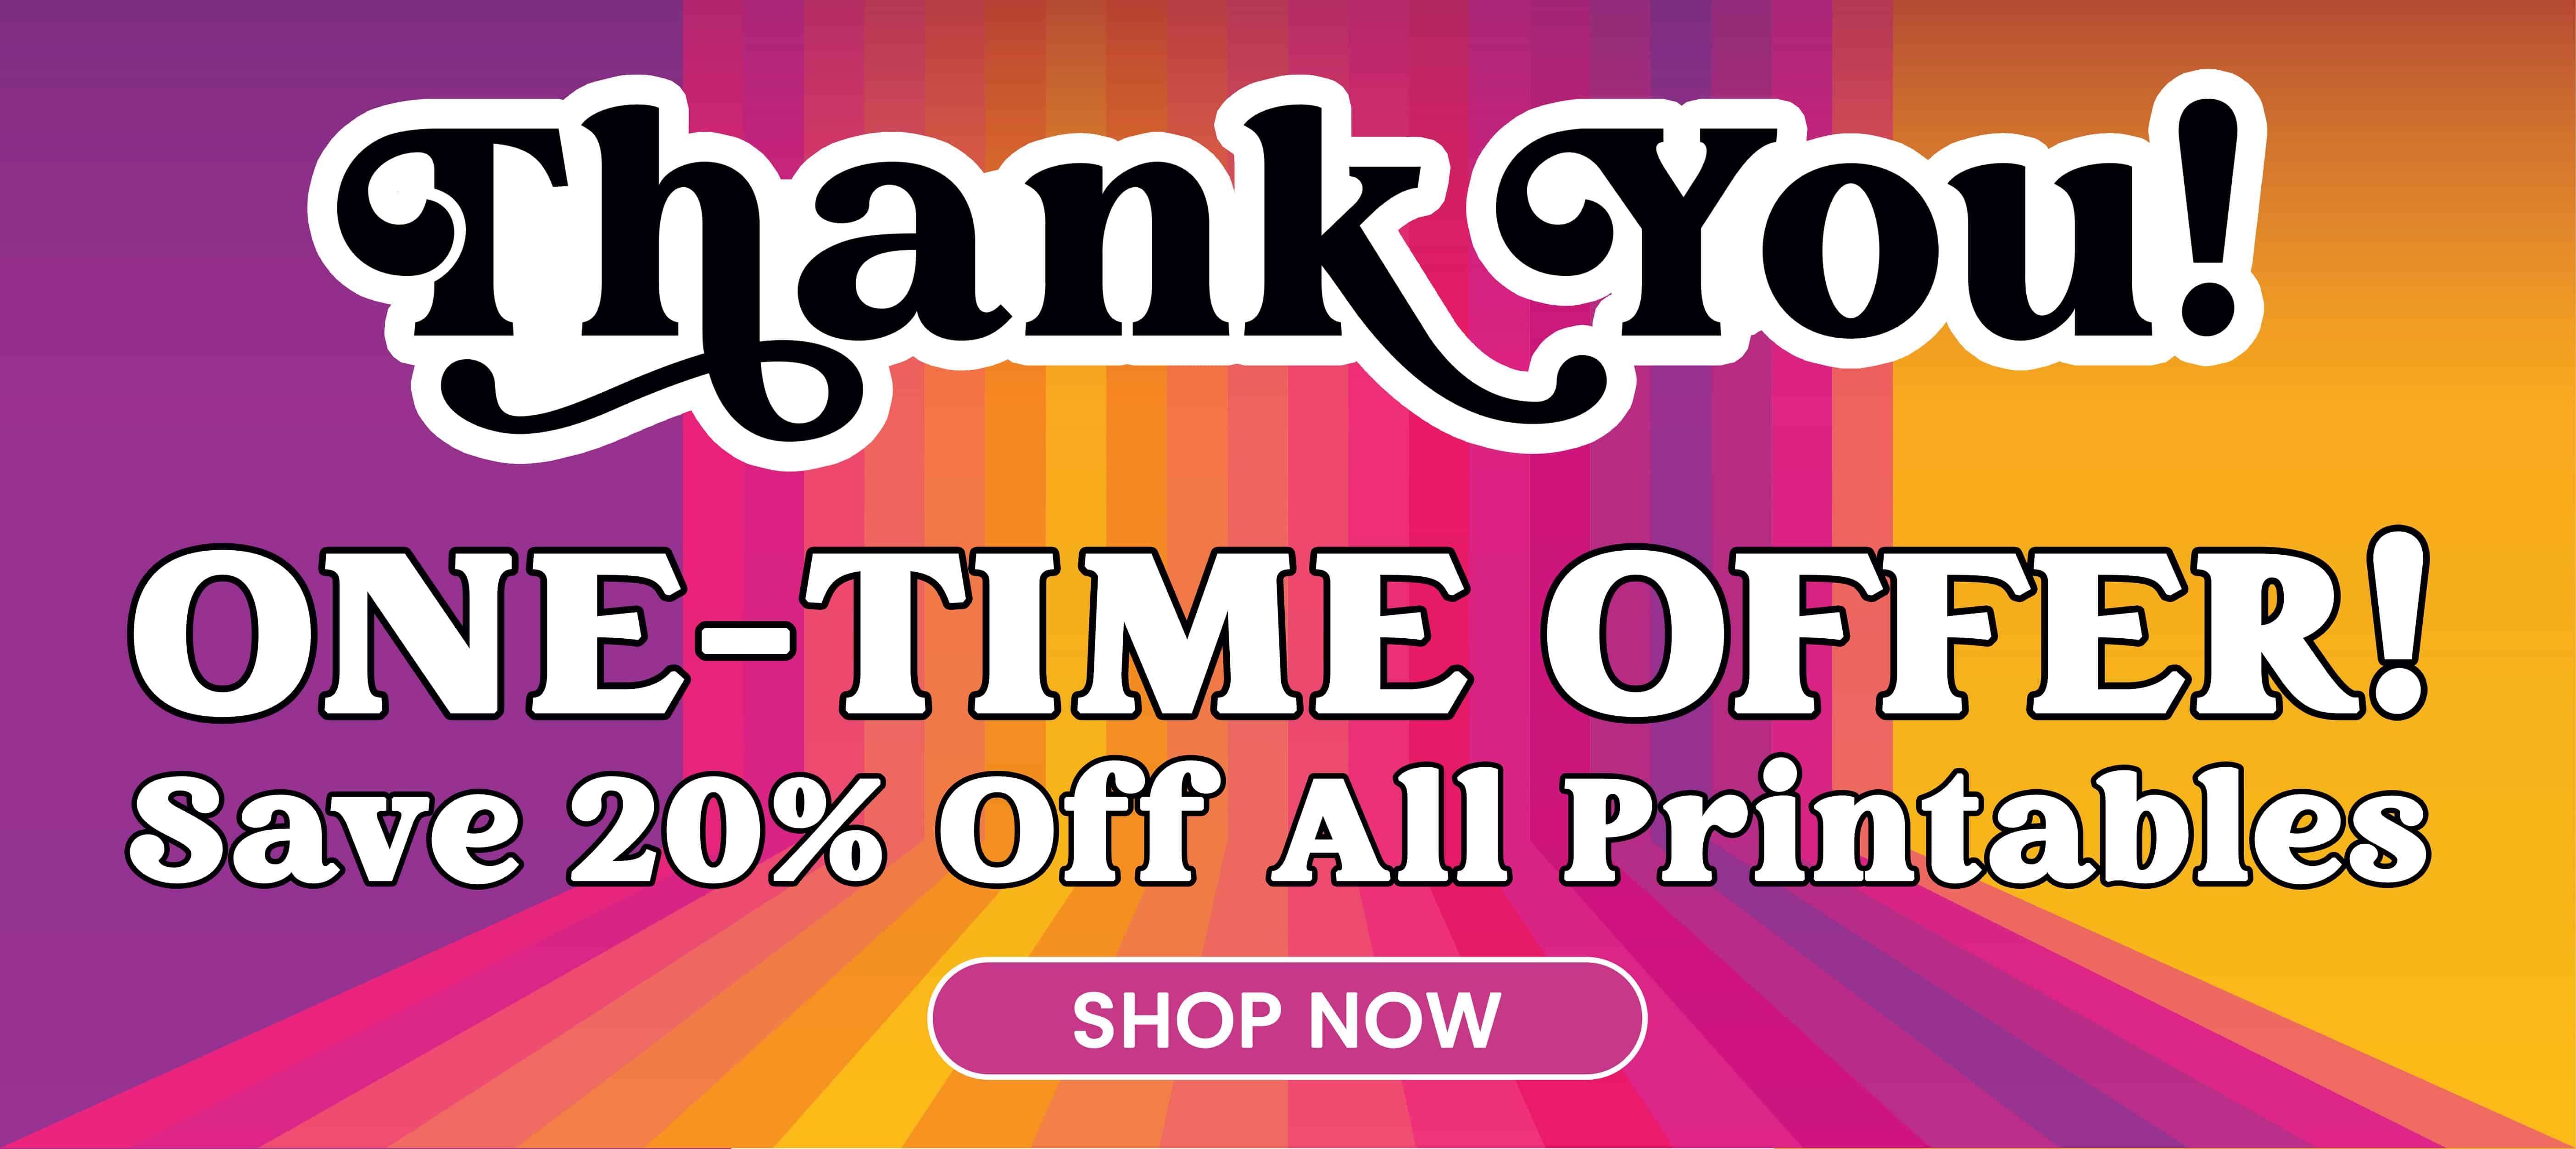 a thank you sign with the words one - time offer save 20 % off all printables